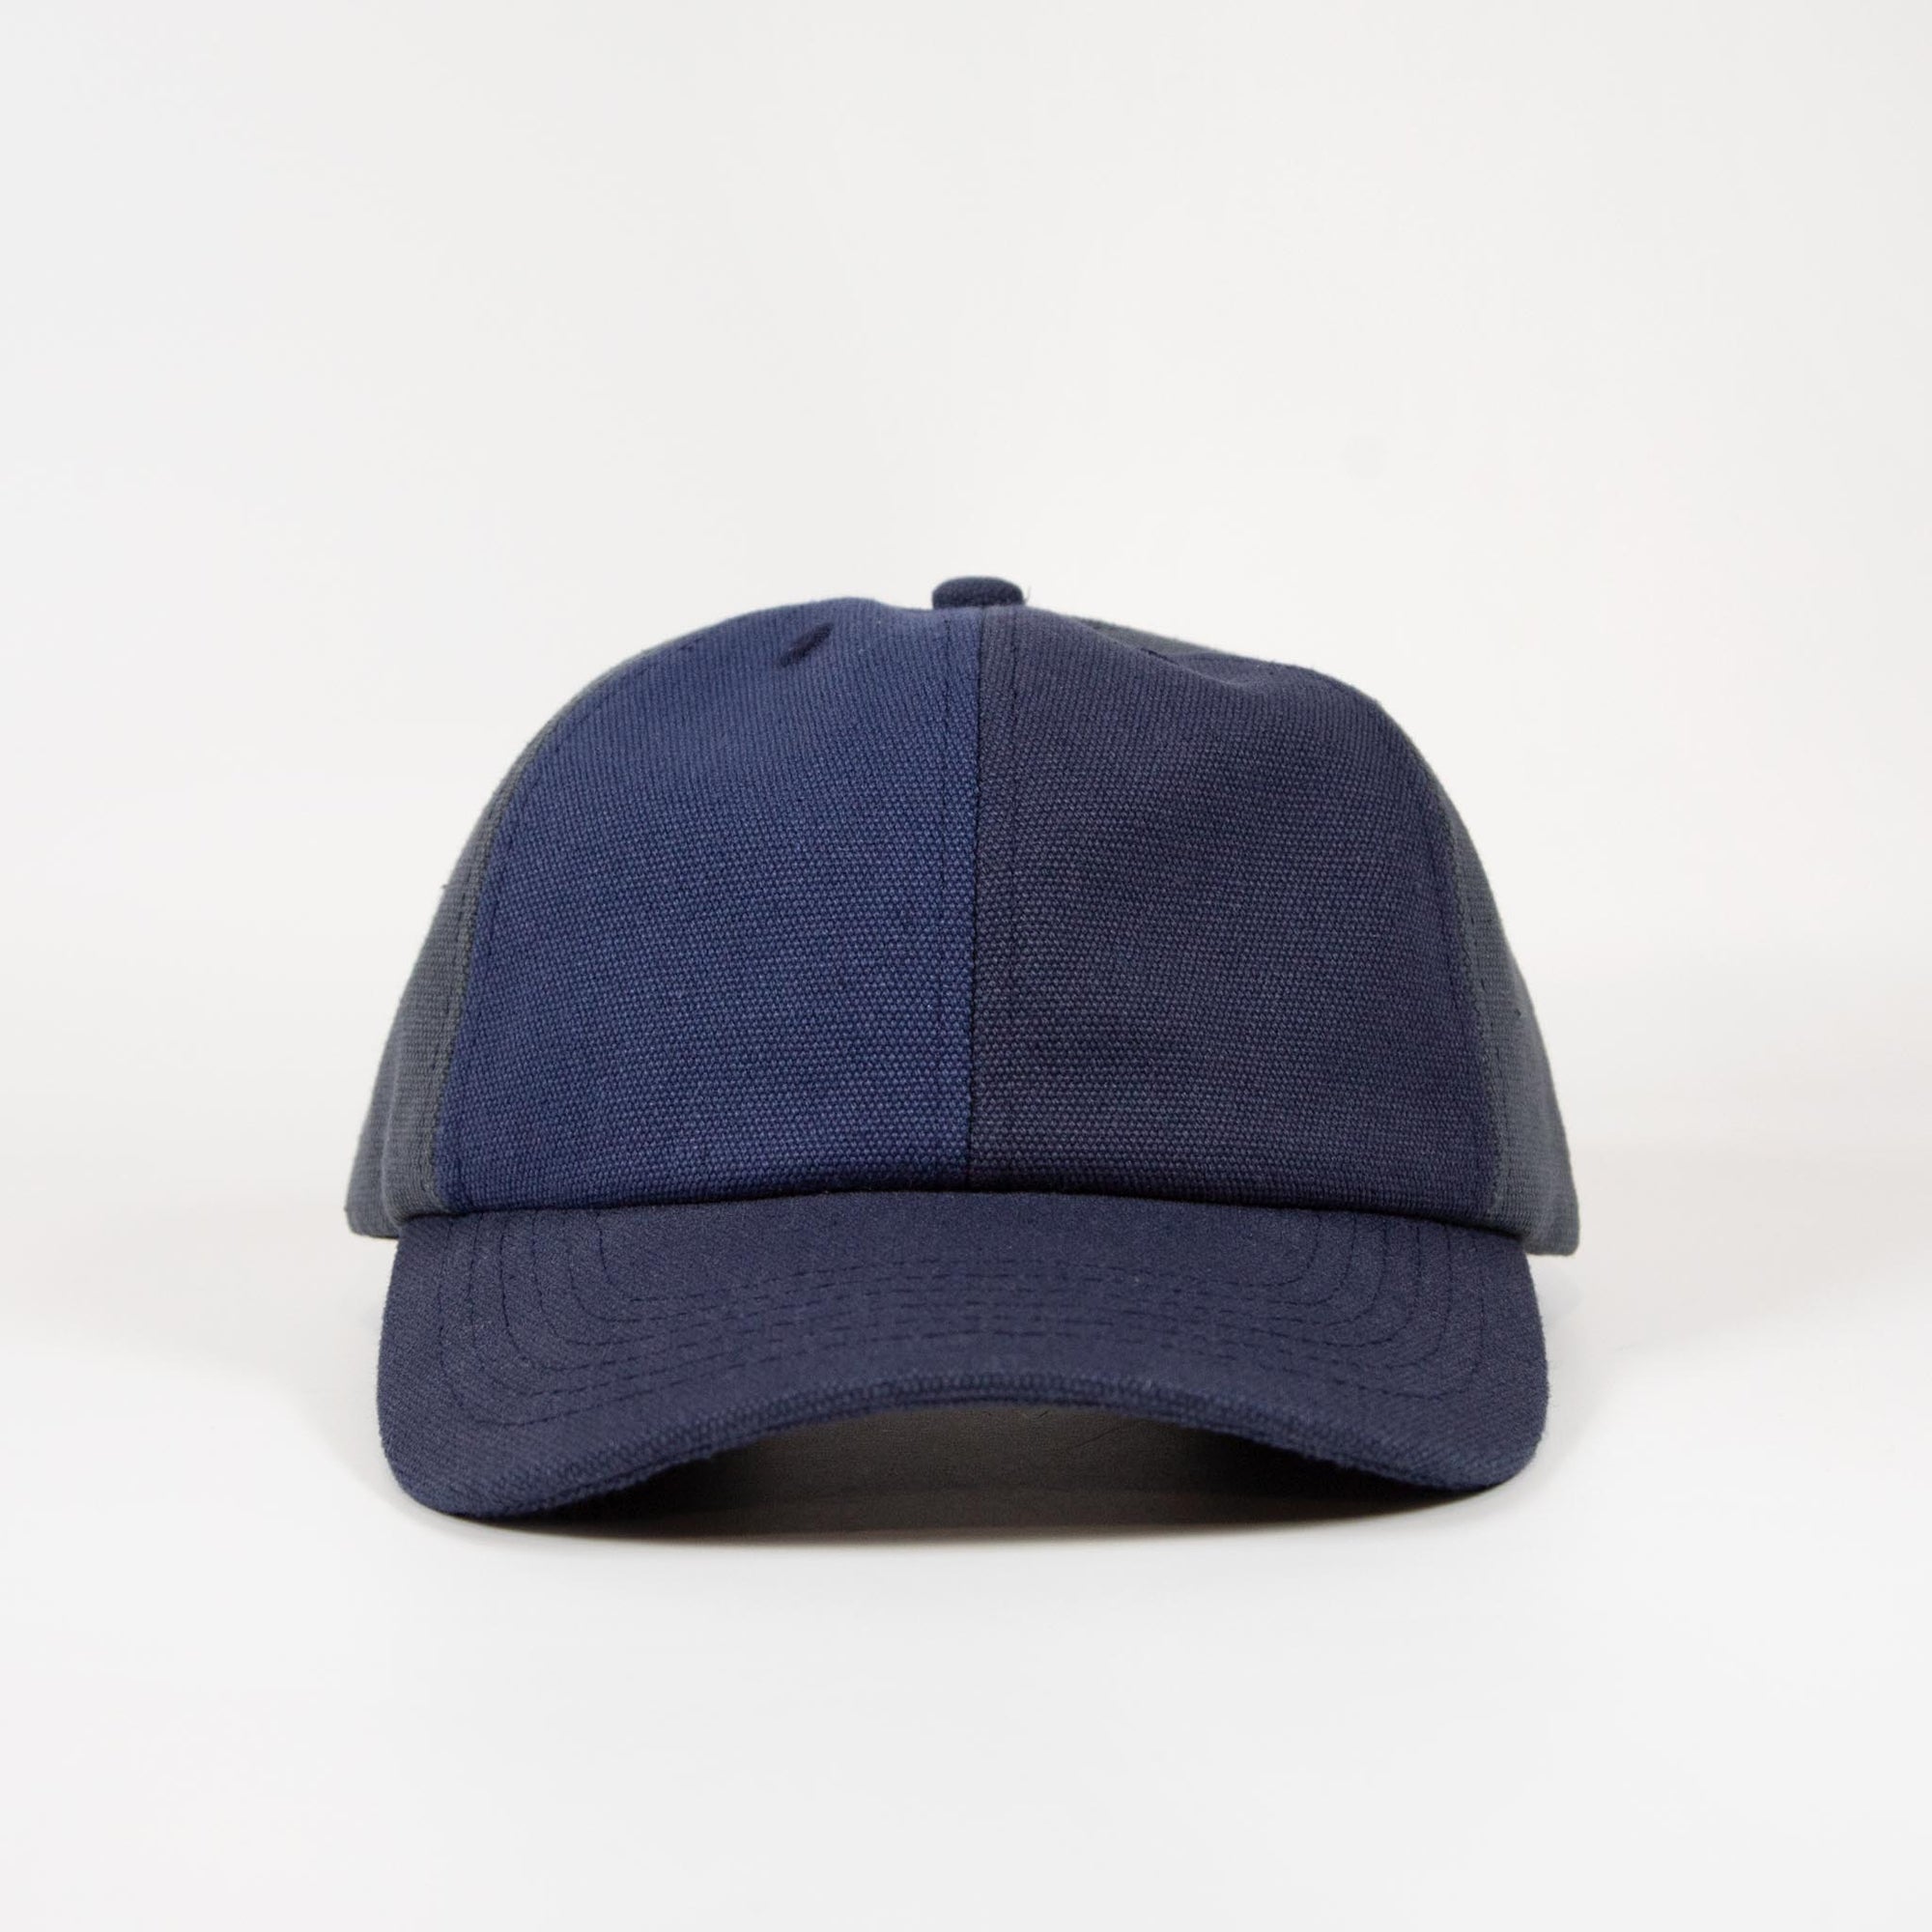 Butter Goods - Canvas Patchwork 6 Panel Cap - Washed Navy